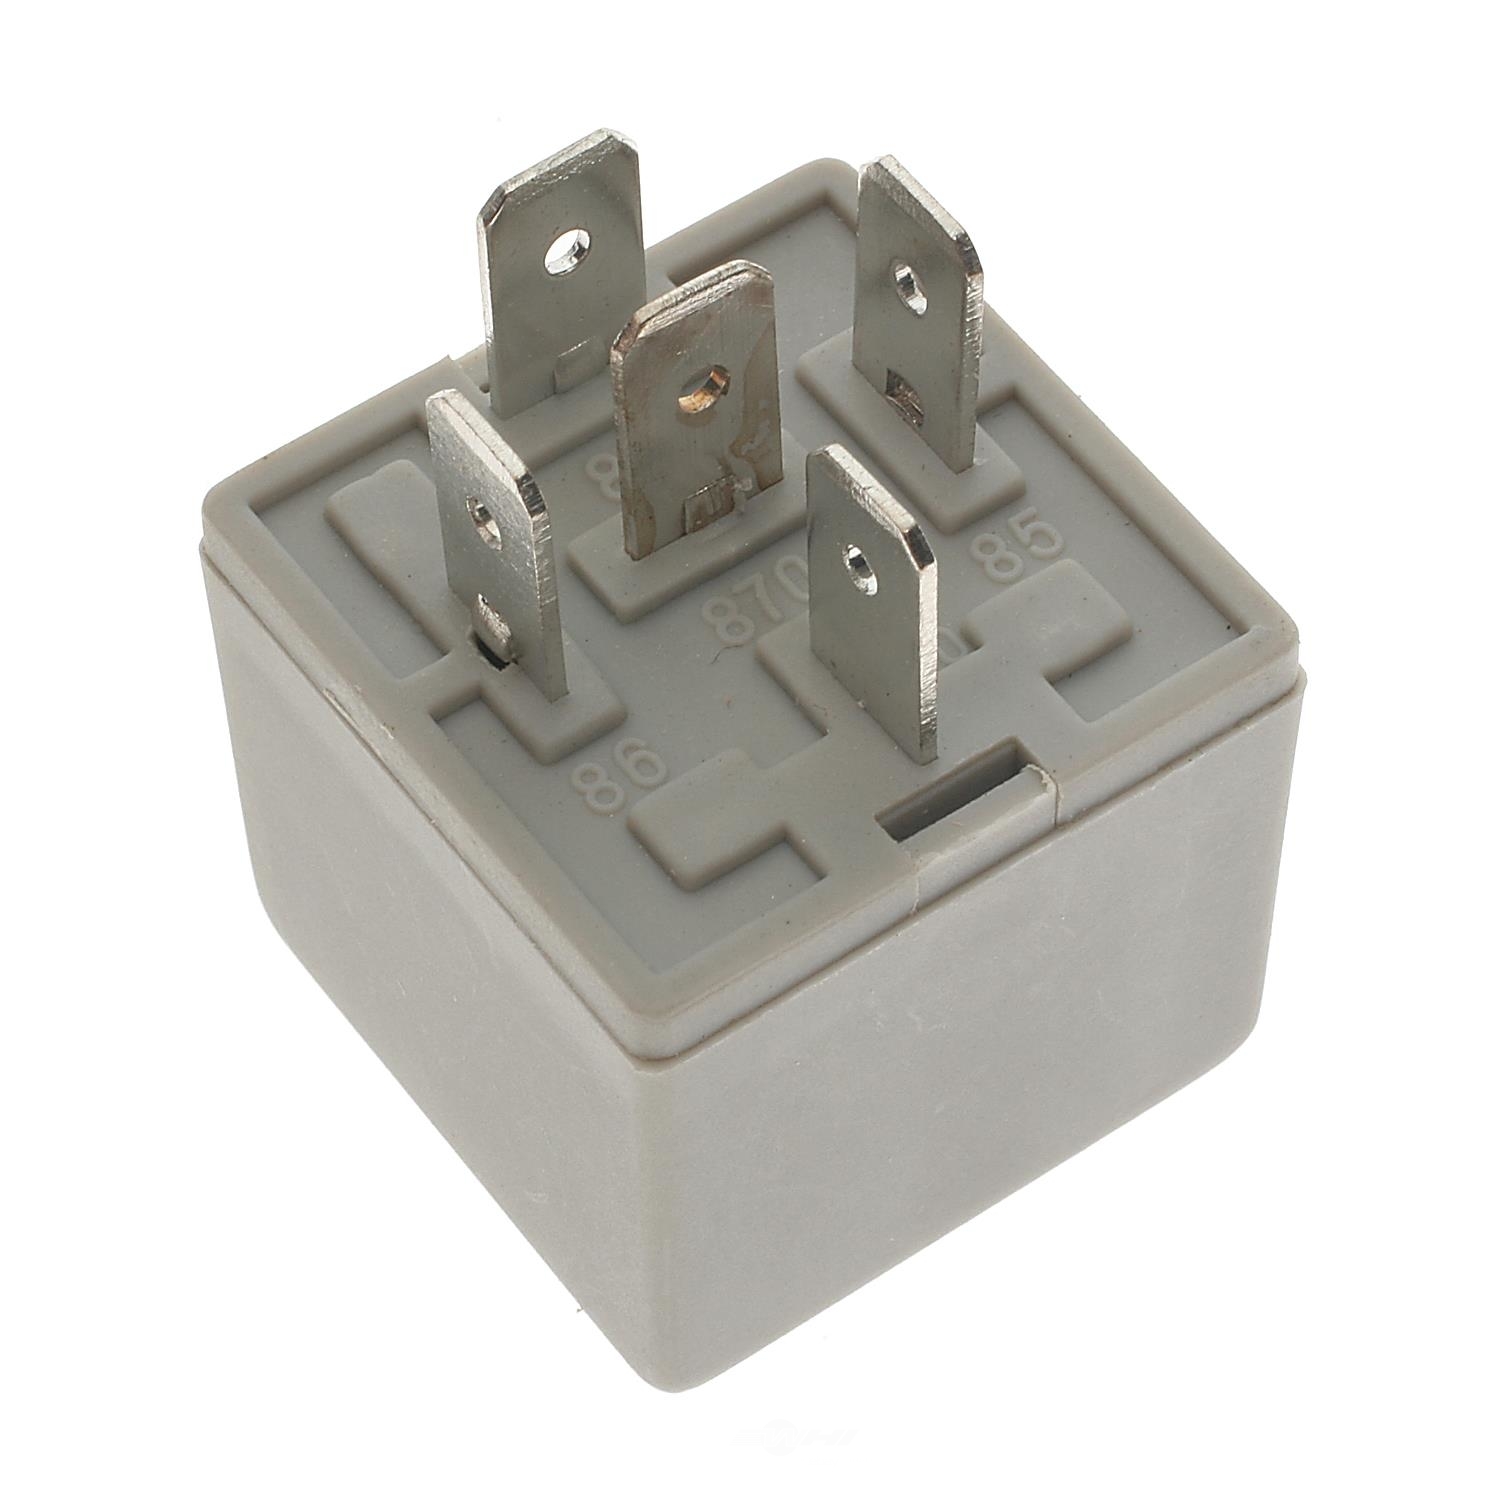 STANDARD T-SERIES - Auto Trans Spark Control Relay - STT RY116T